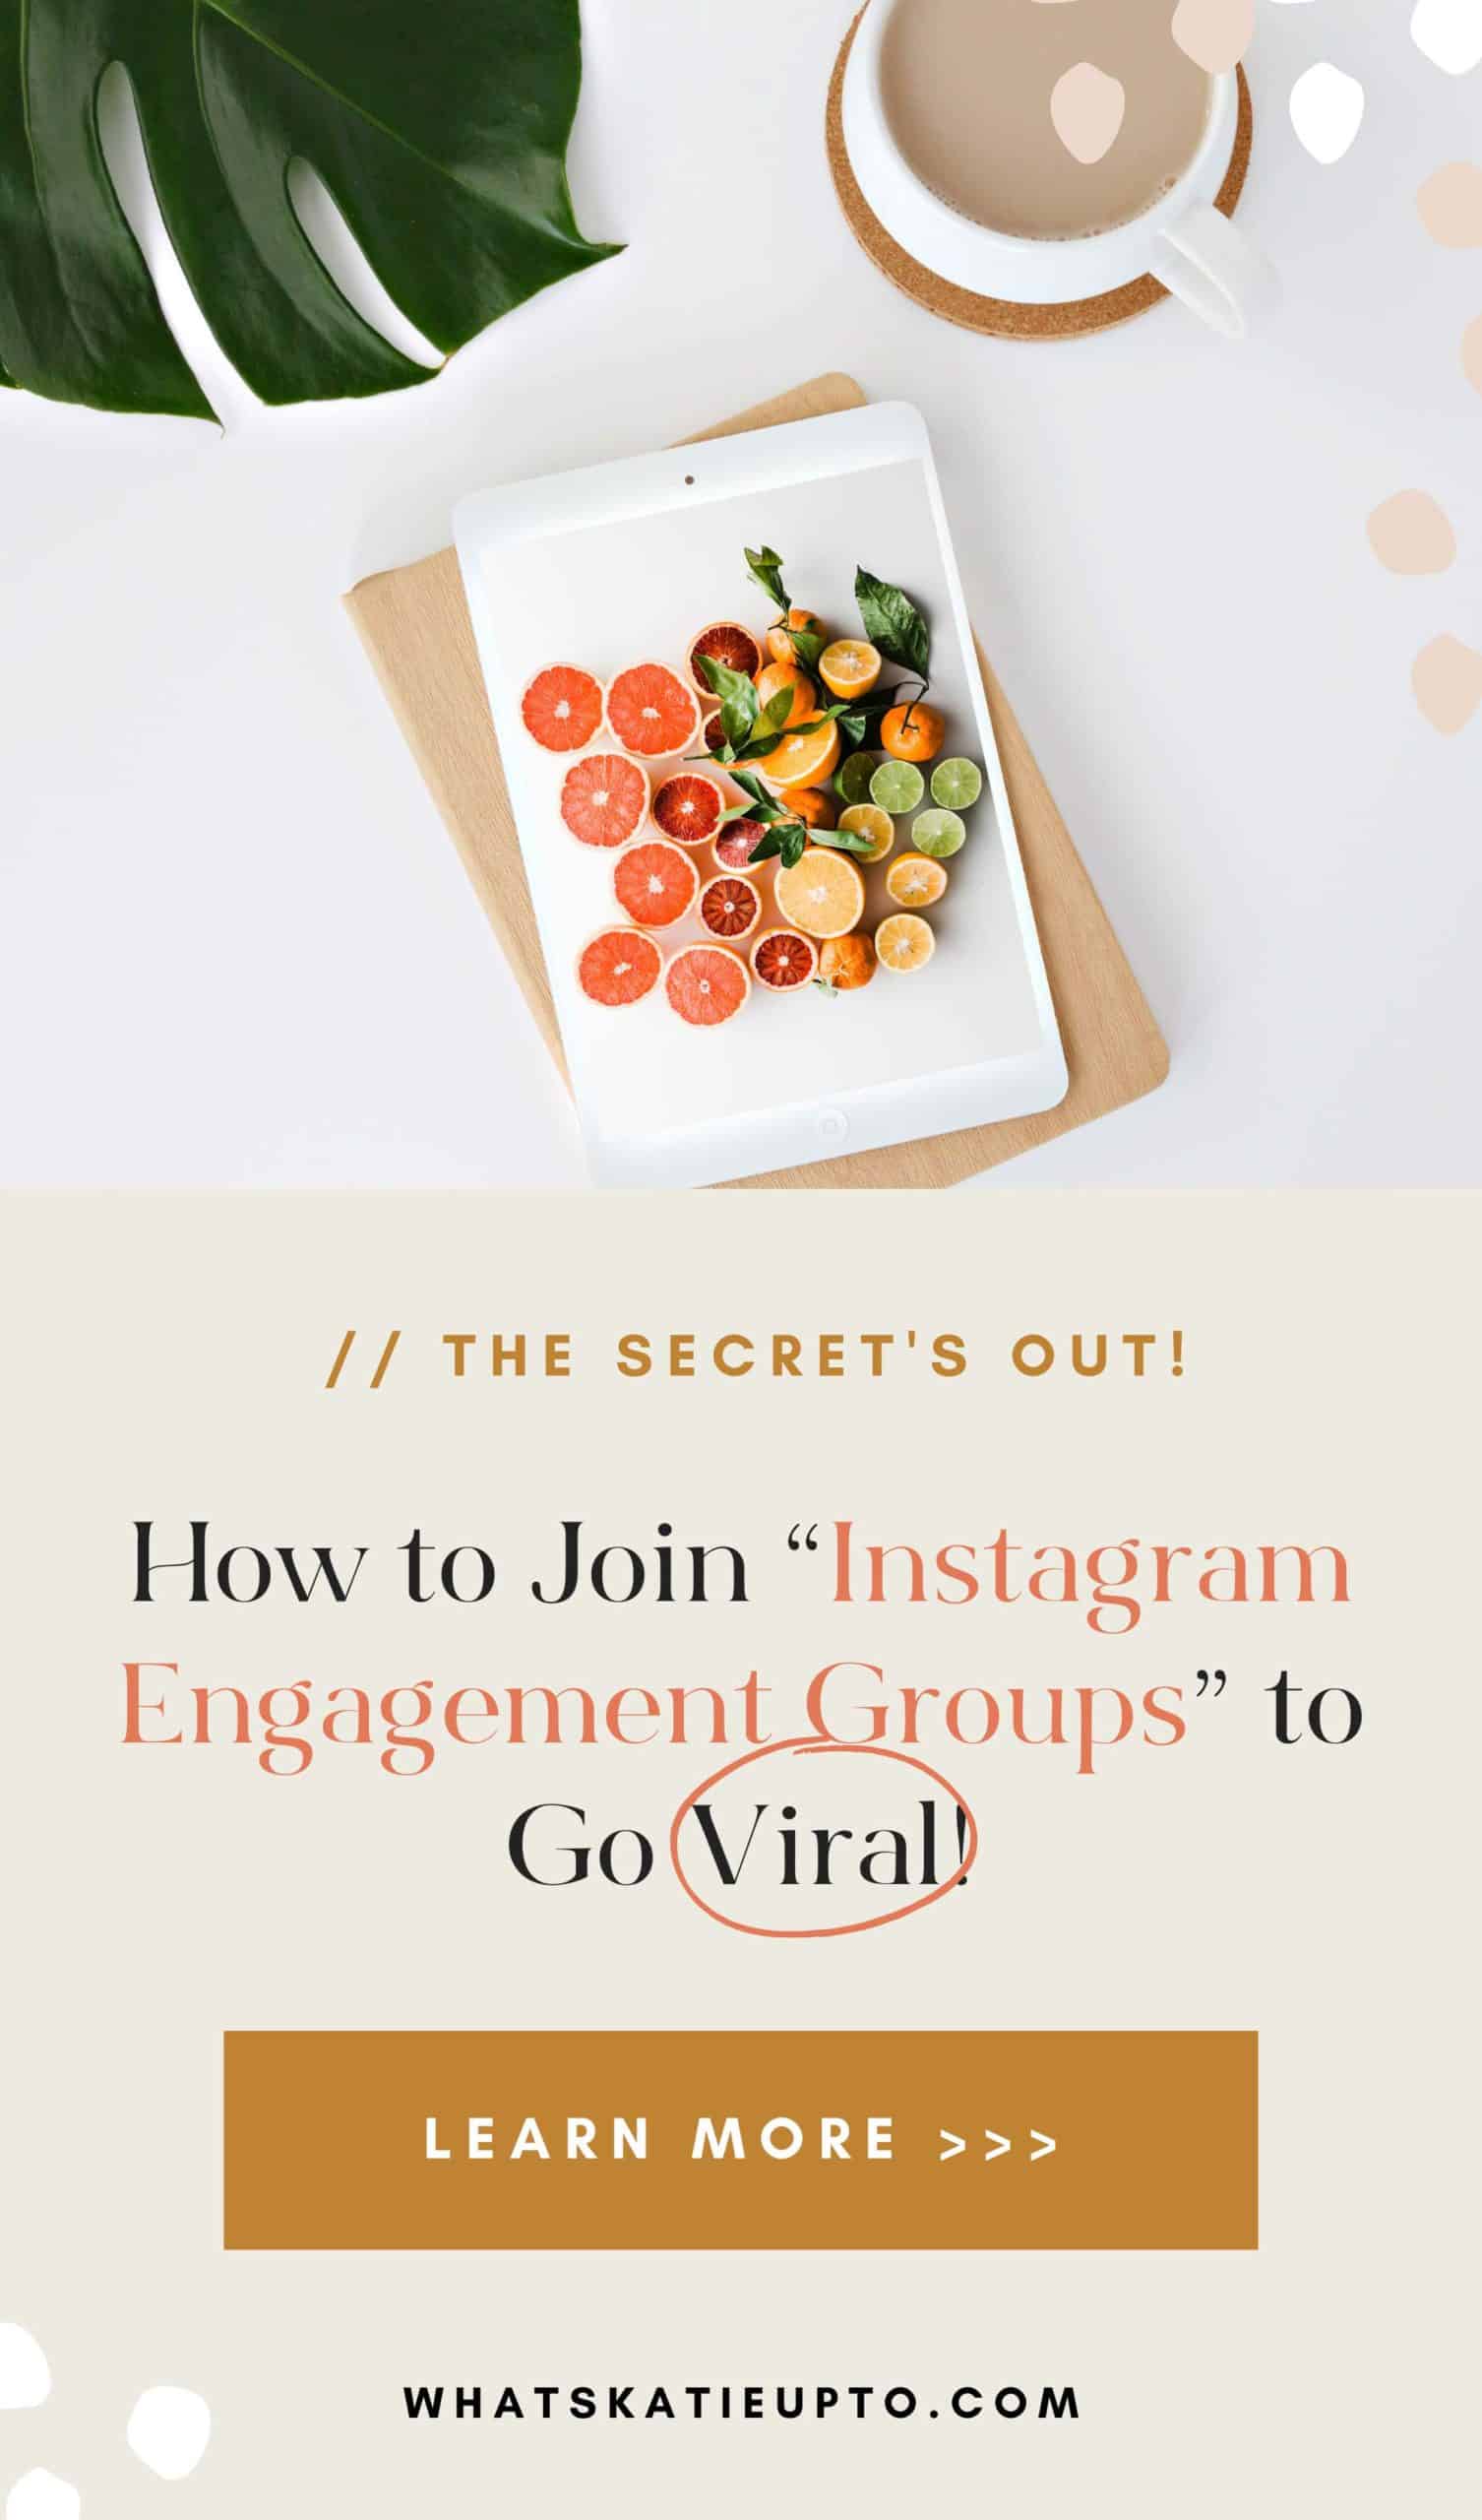 How to join "Instagram Engagement Groups" to go Viral! Katie Grazer